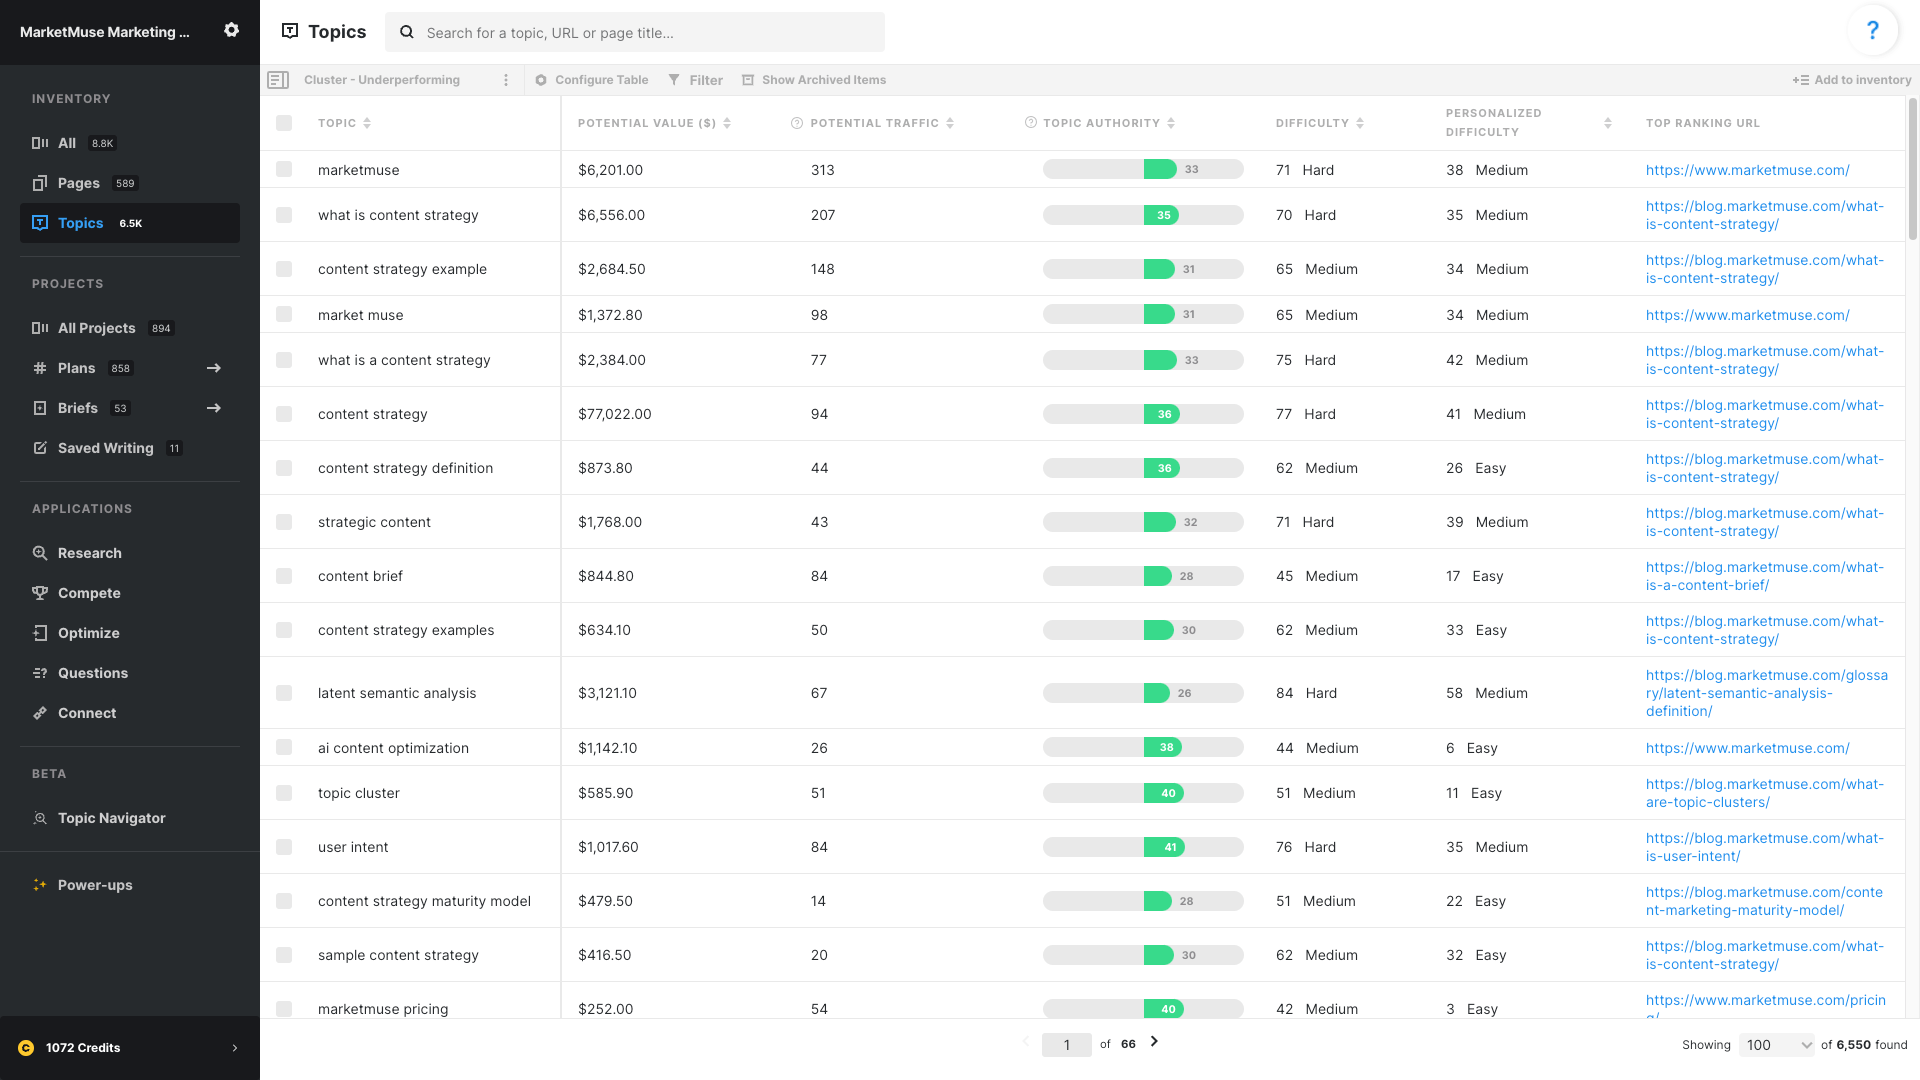 Saved View for finding clusters at risk. Showing the metrics topics, potential value in dollars, potential traffic, topic authority, difficulty, personalized difficulty, and top ranking URL.